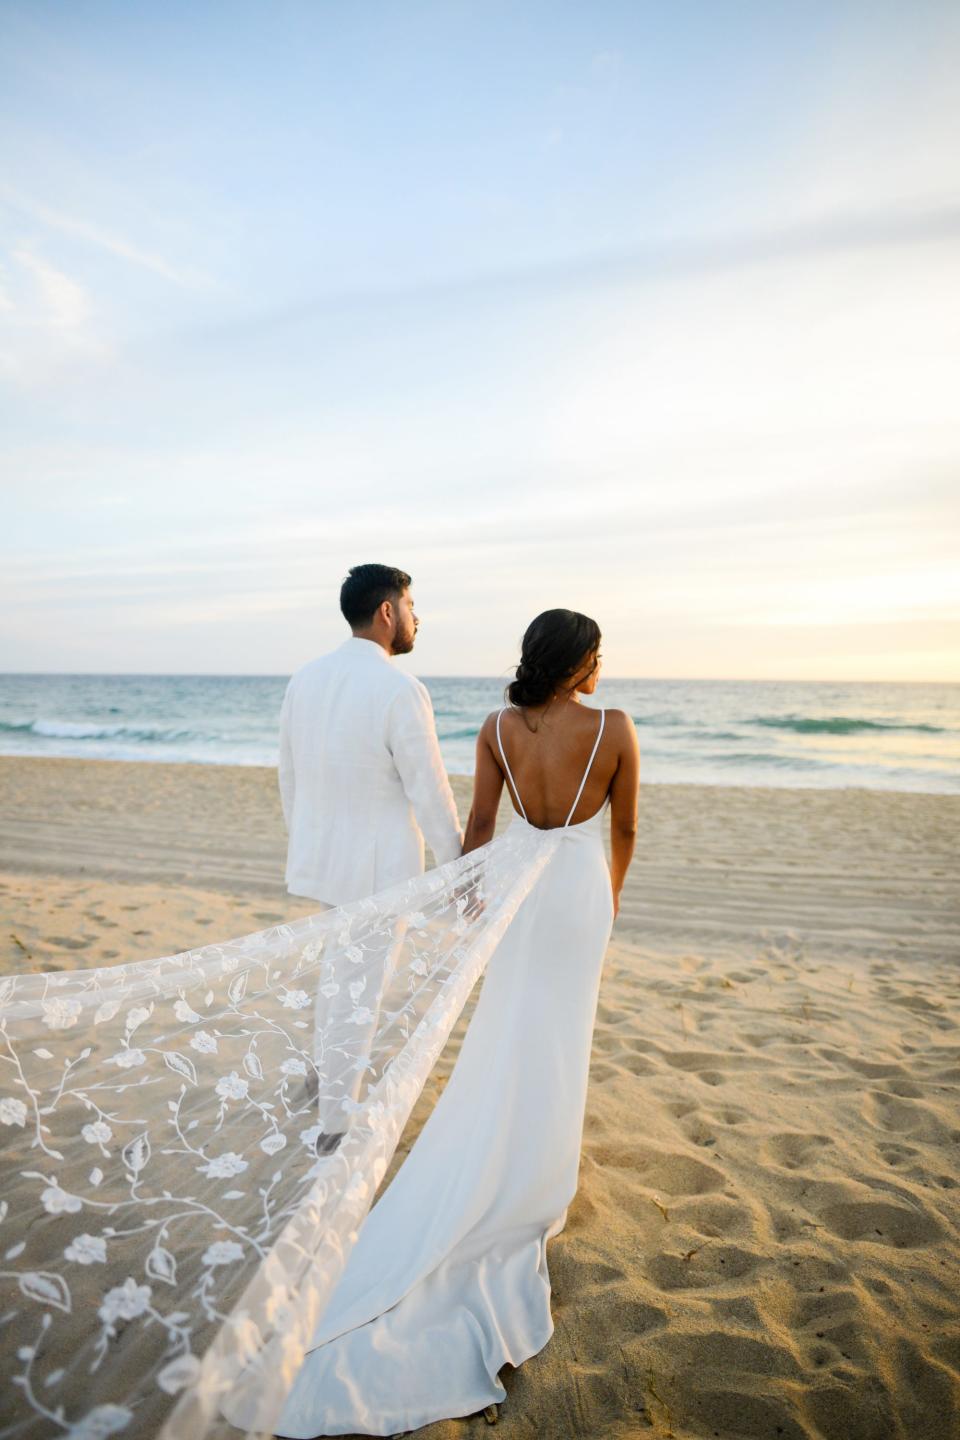 A man in a white suit and a woman in a wedding dress look at the ocean while standing on the beach.